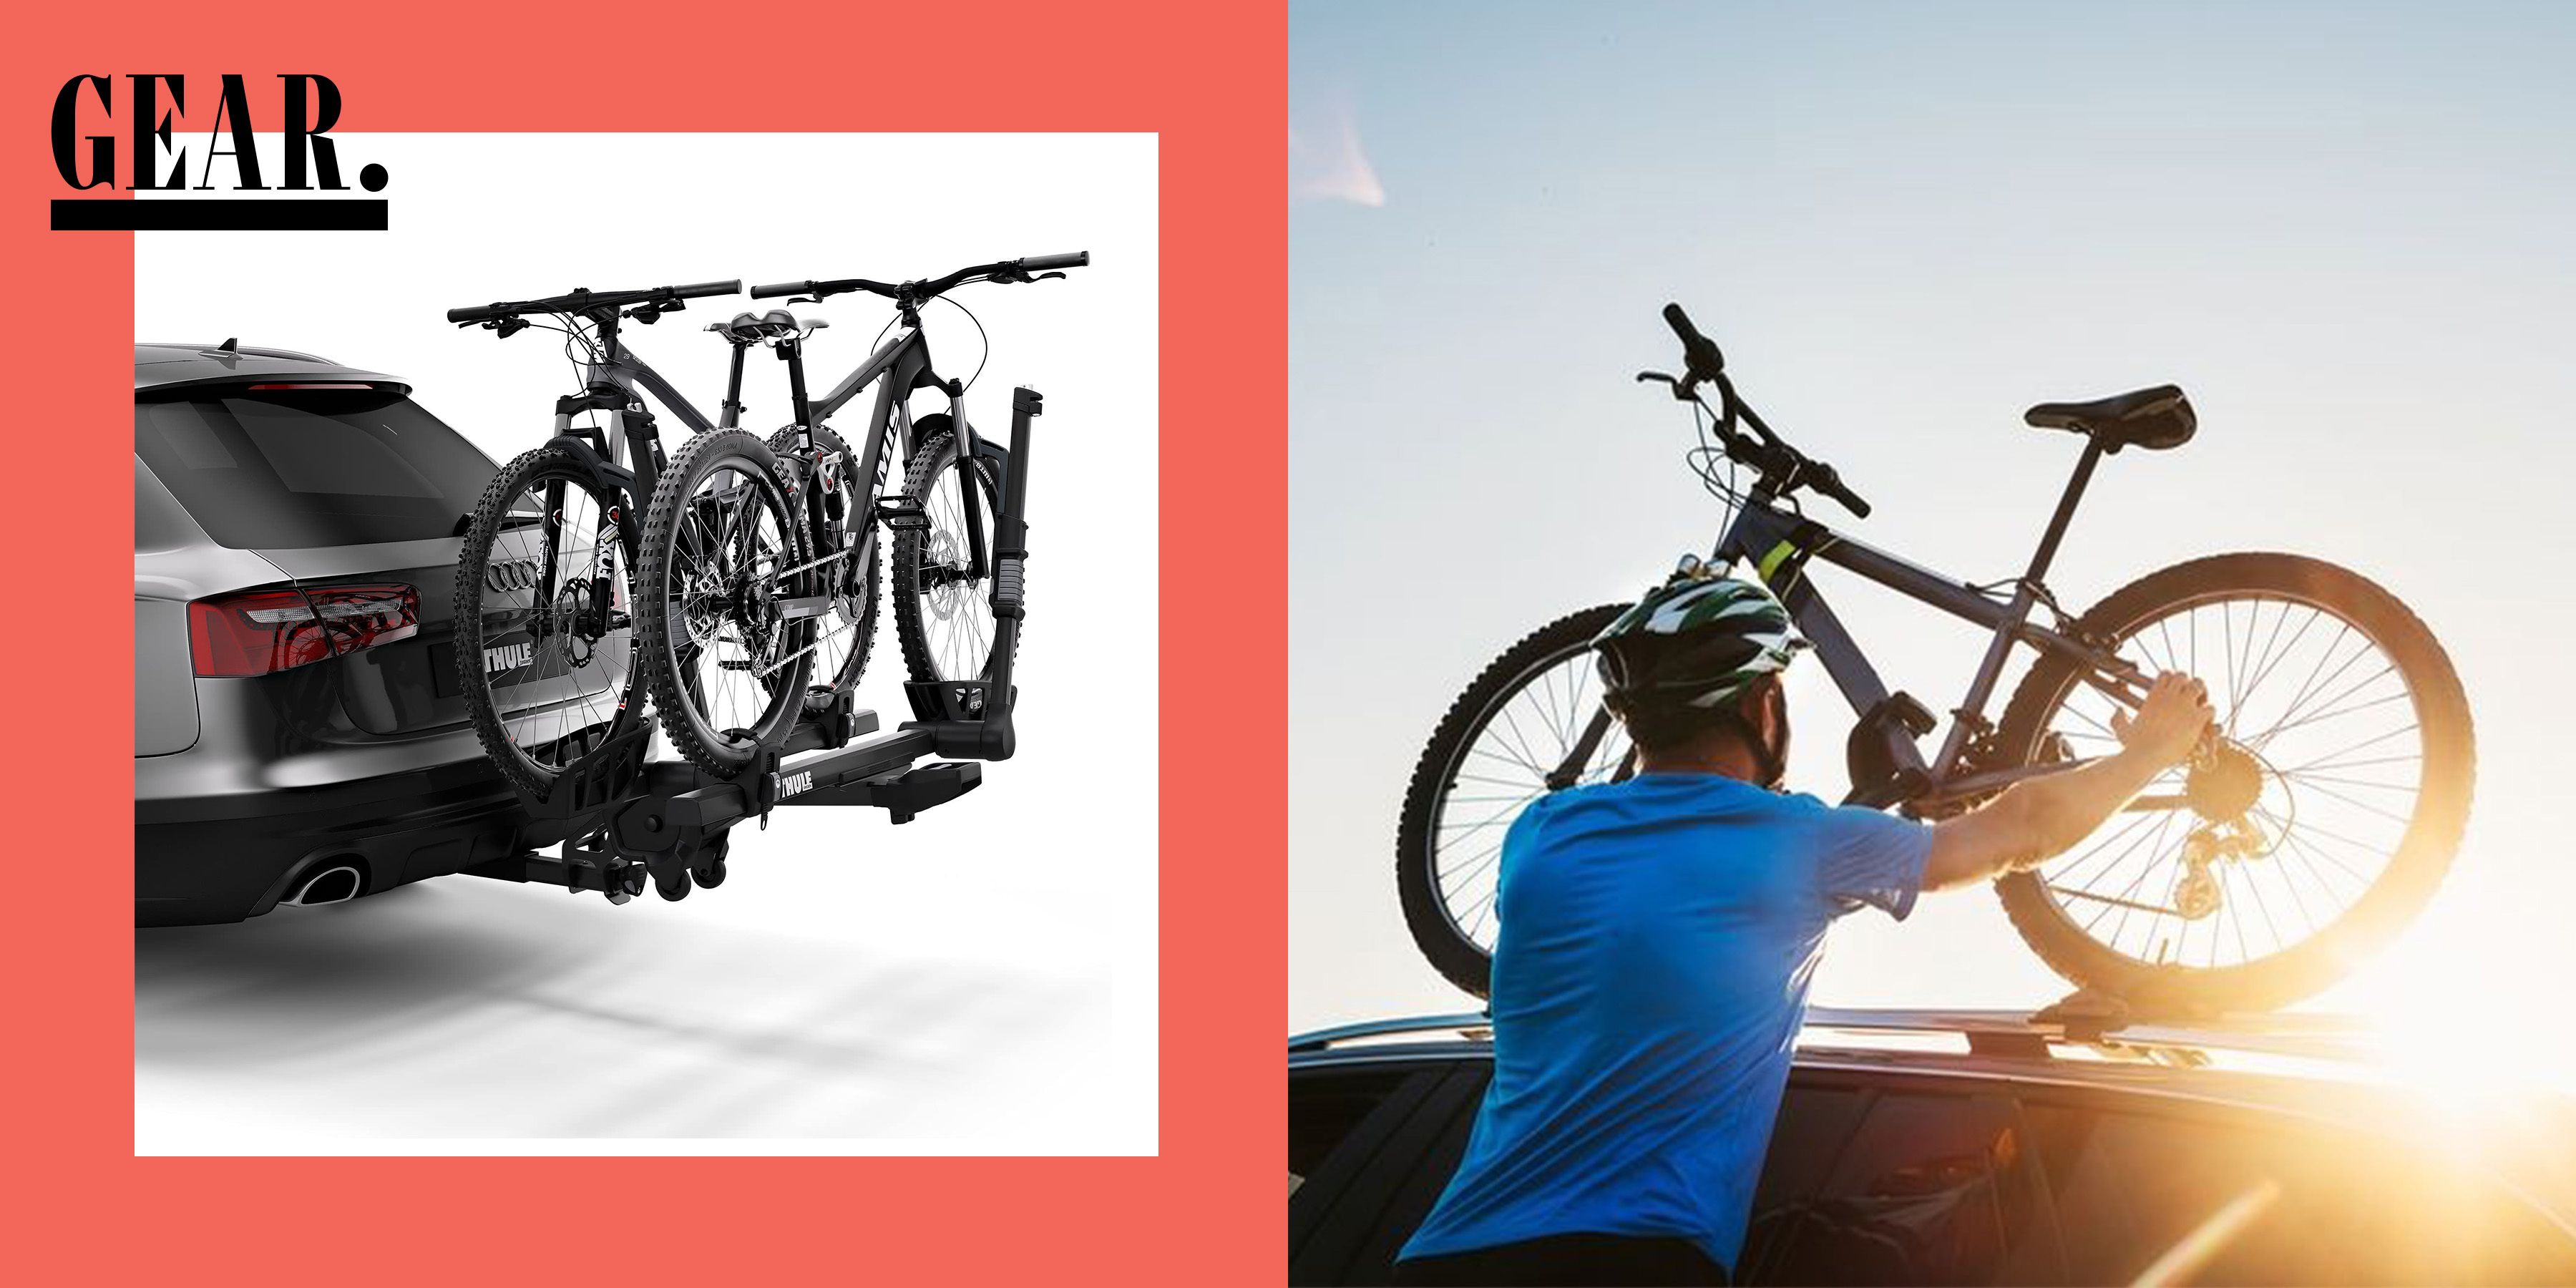 Descanso Arreglo barrera 18 Best Bike Racks for Cars & Trucks, Picked by Experts - Road & Track